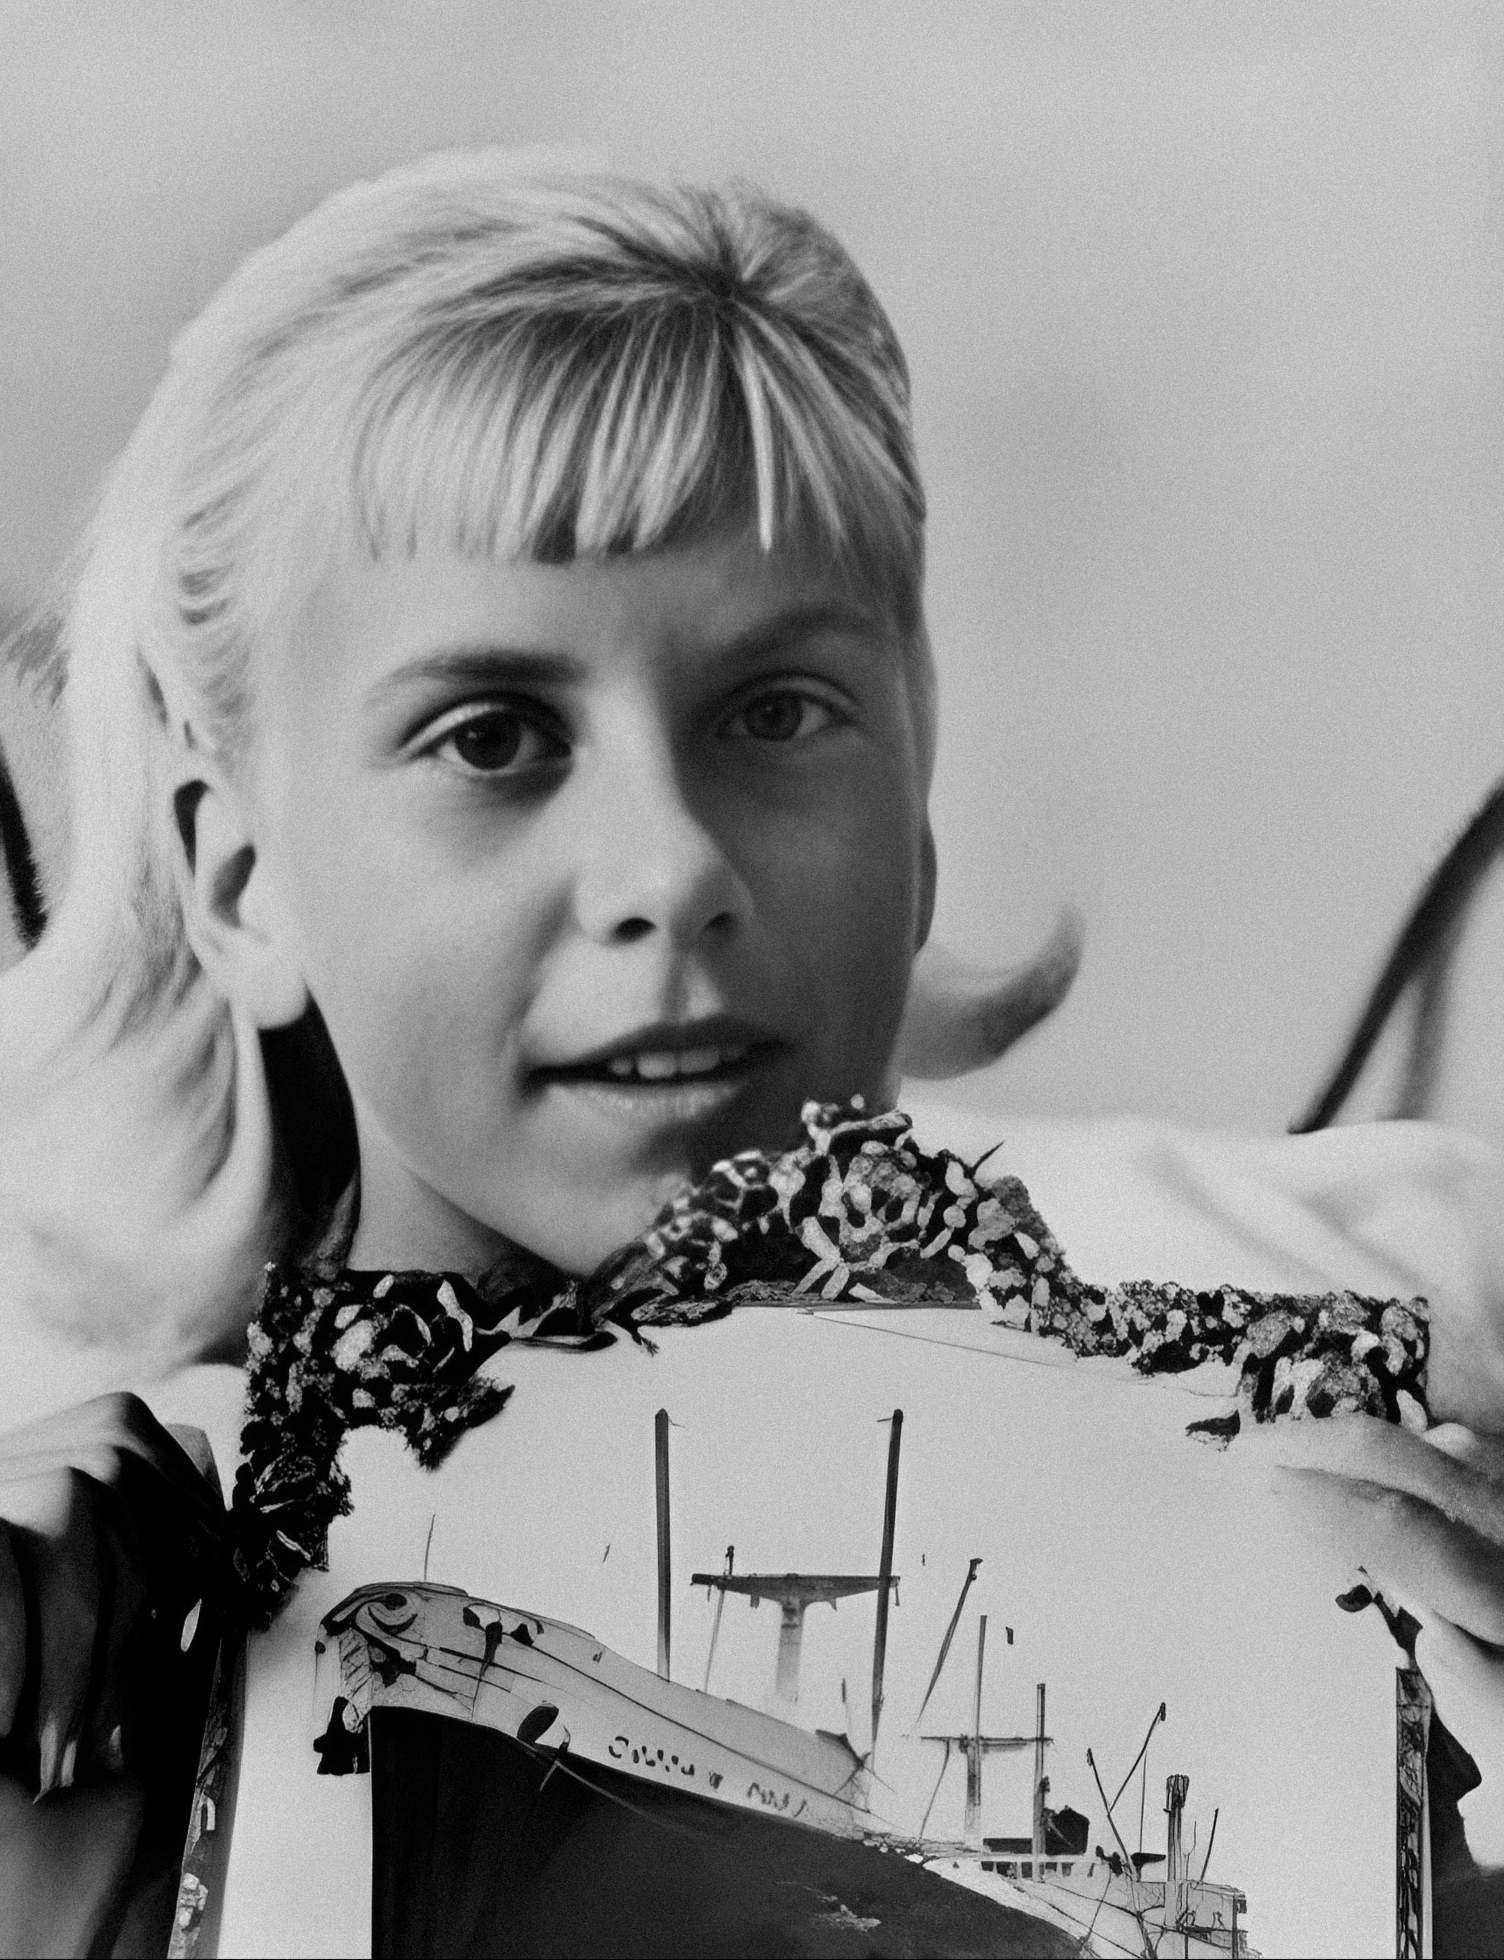 Terry Jo Dupperault, as photographed recuperating in hospital holding a photograph of the Captain Theo, her rescuer ship. It was pictured in the Thursday, 23 November 1961 edition of the New York Daily News. Wikimedia Commons / Restored by MRU.INK